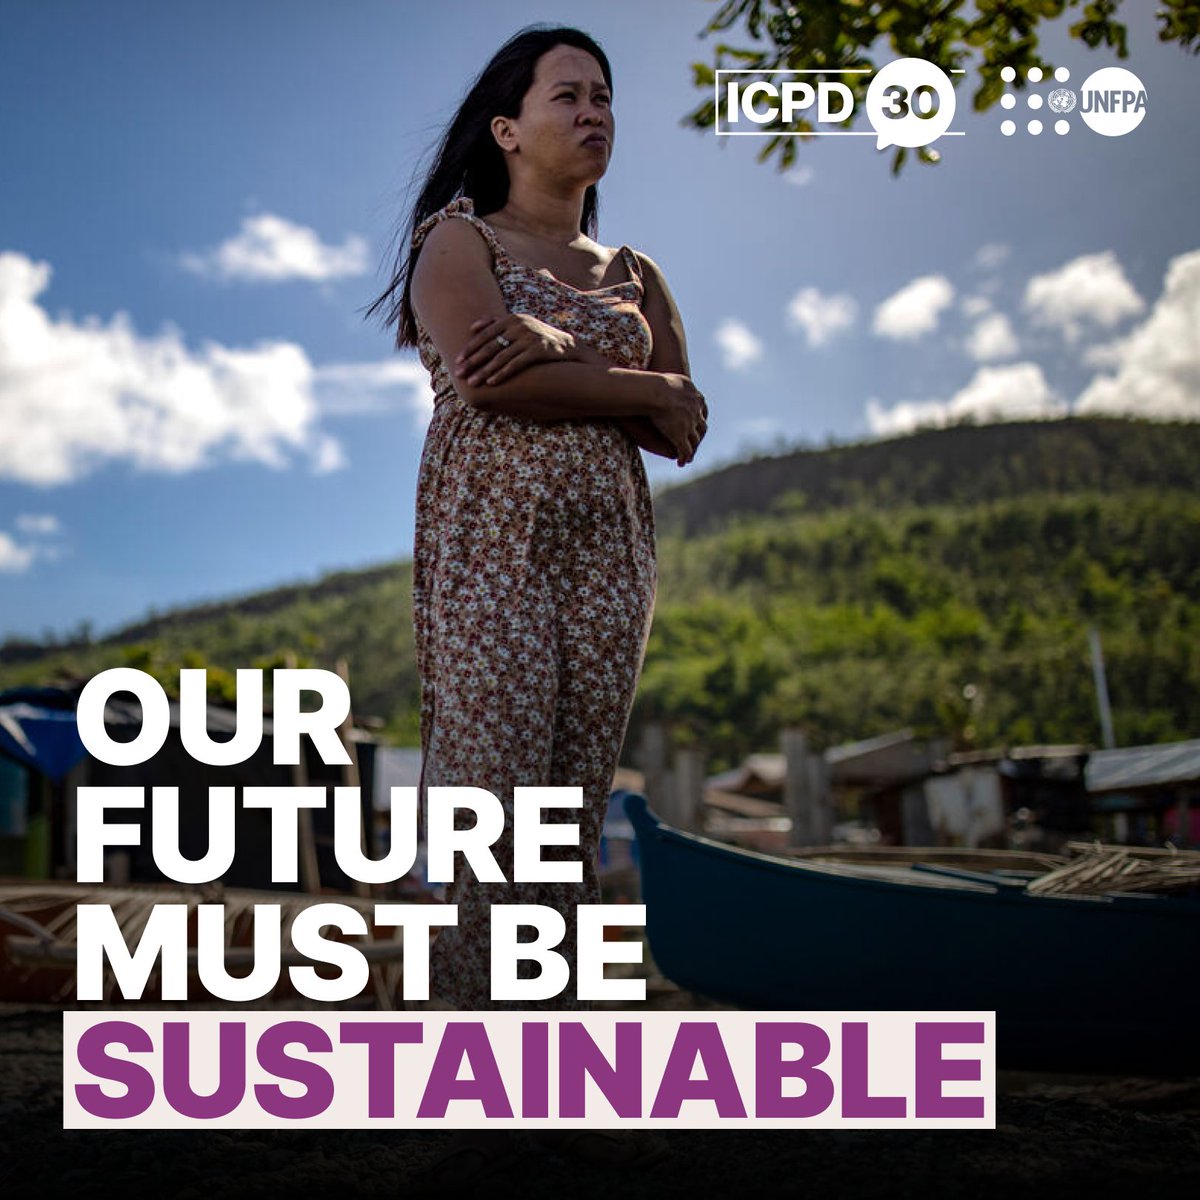 Collective action is how we make #OurCommonFuture better for the next generation.

During #CPD57, get the facts from @‌UNFPA and join the global call for #ClimateAction: unf.pa/cpd57

#ICPD30 #GlobalGoals